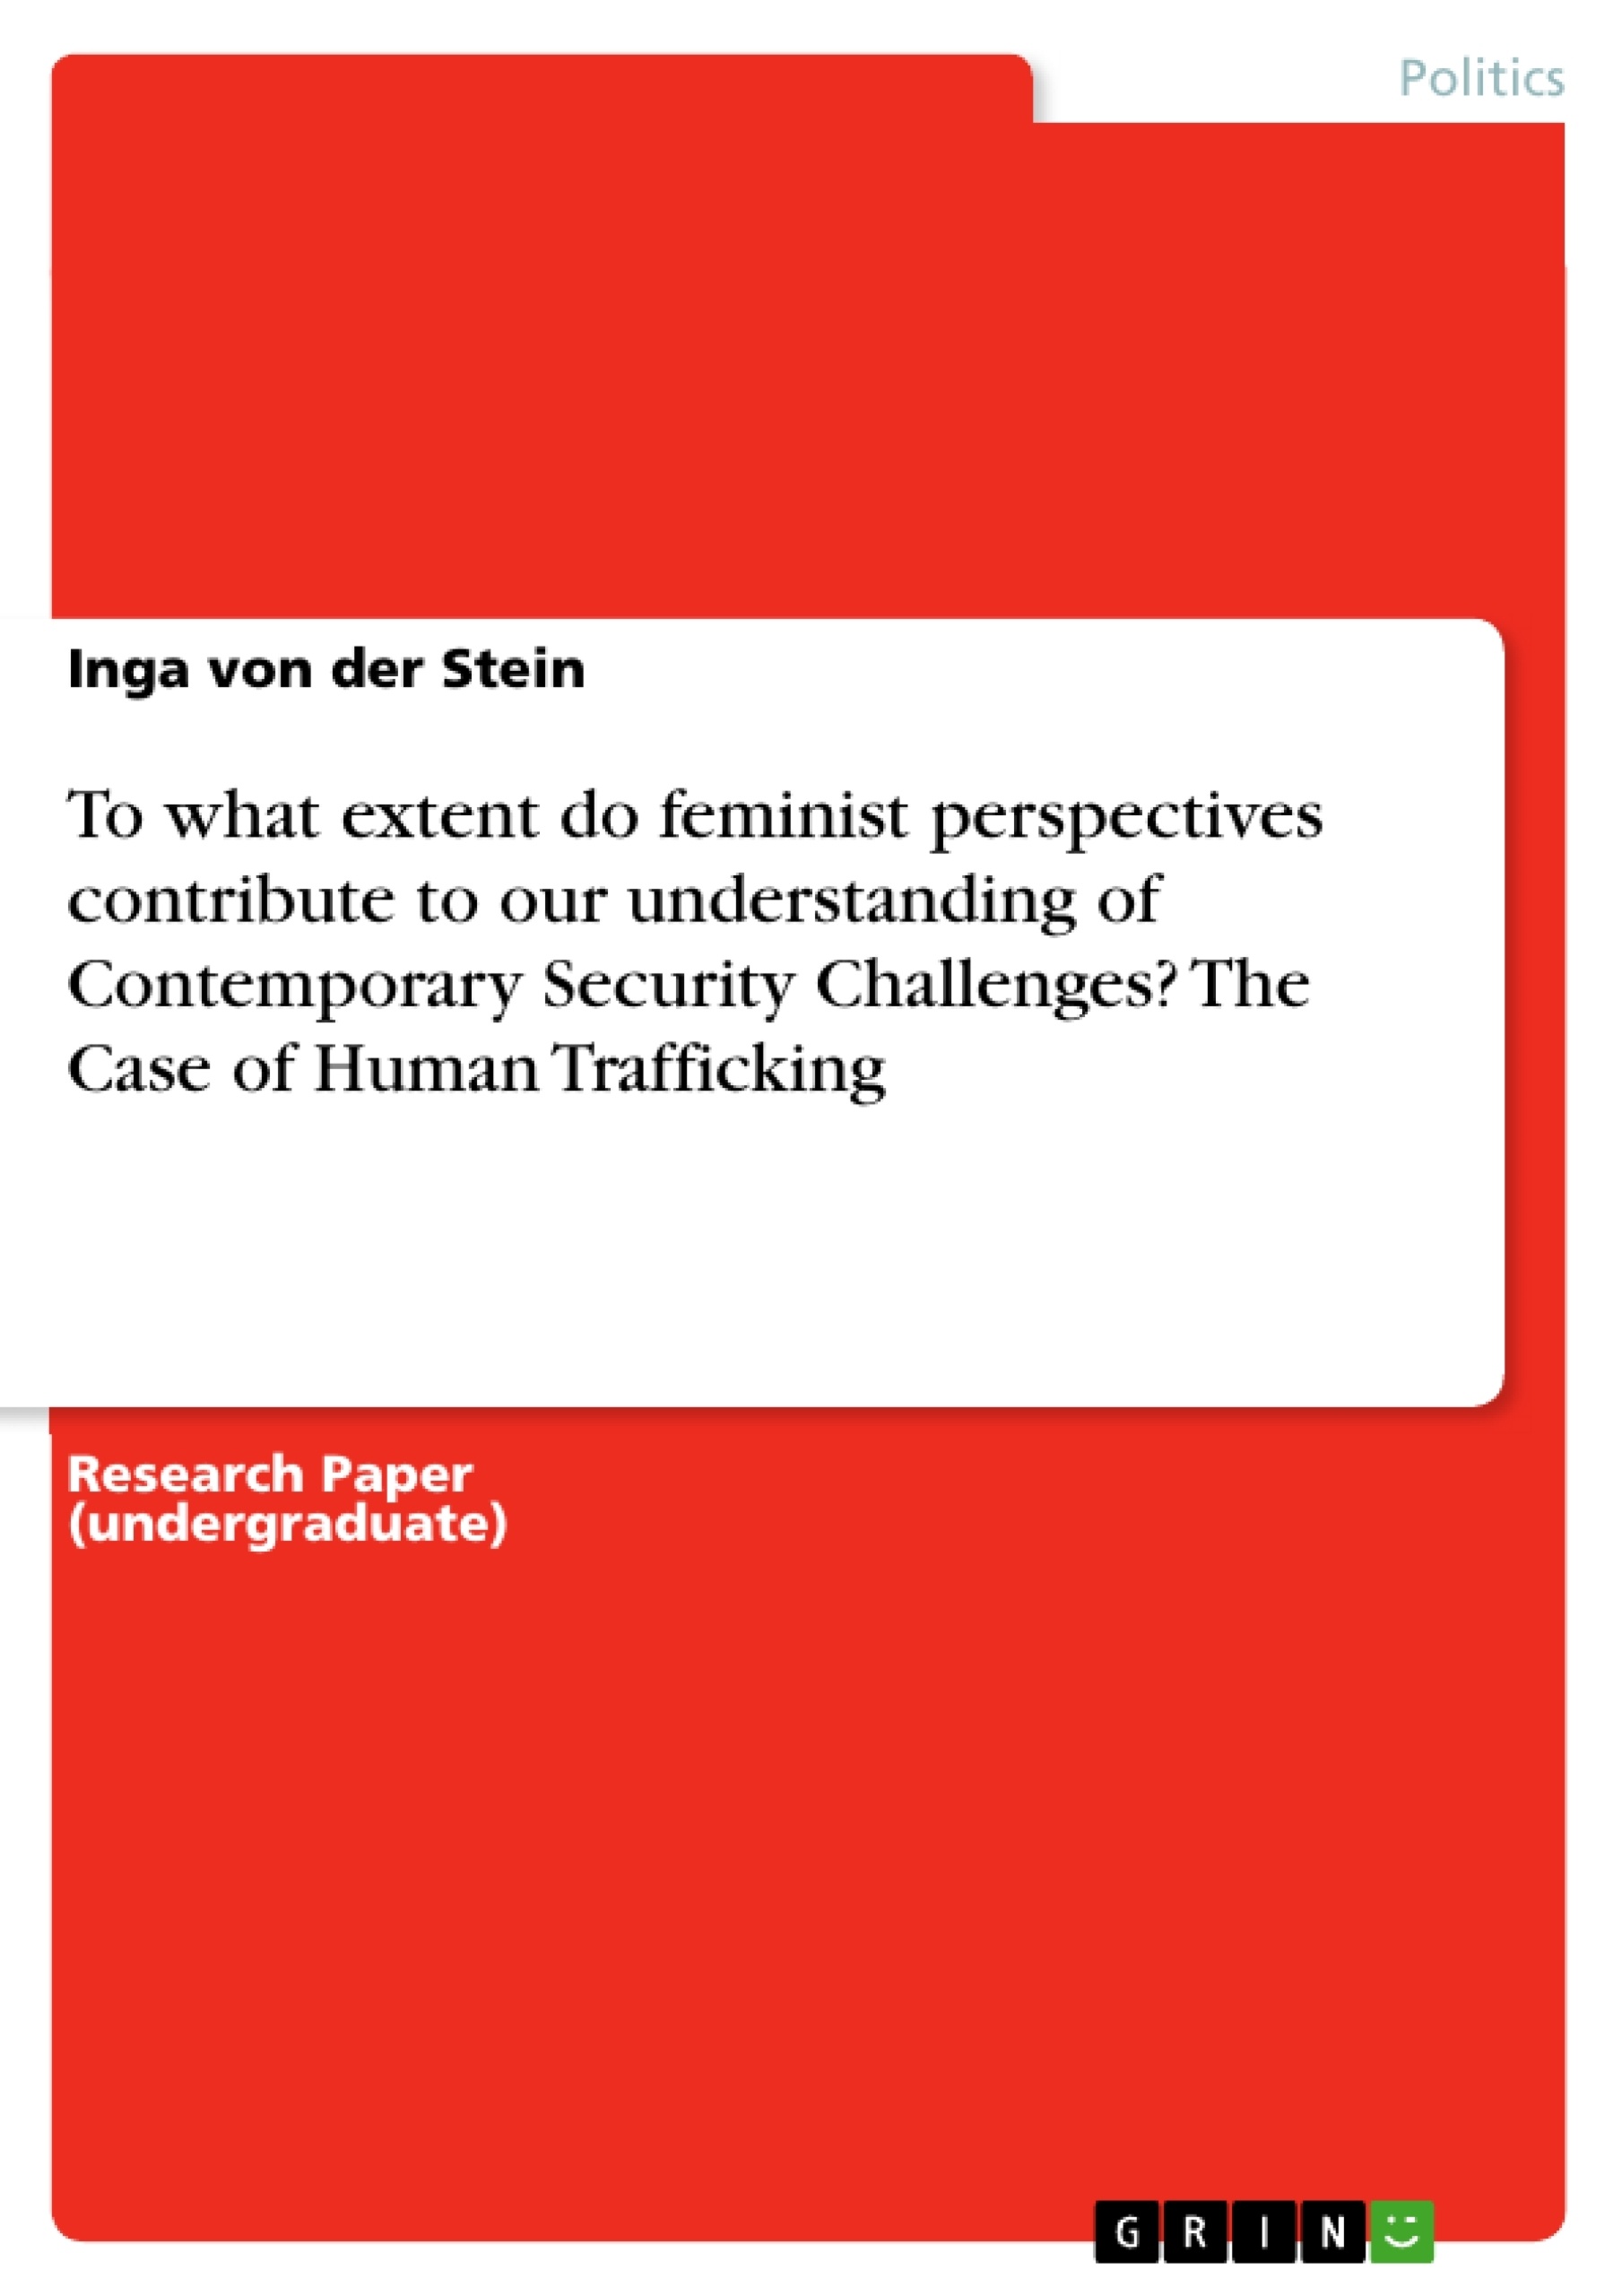 Title: To what extent do feminist perspectives contribute to our understanding of Contemporary Security Challenges? The Case of Human Trafficking